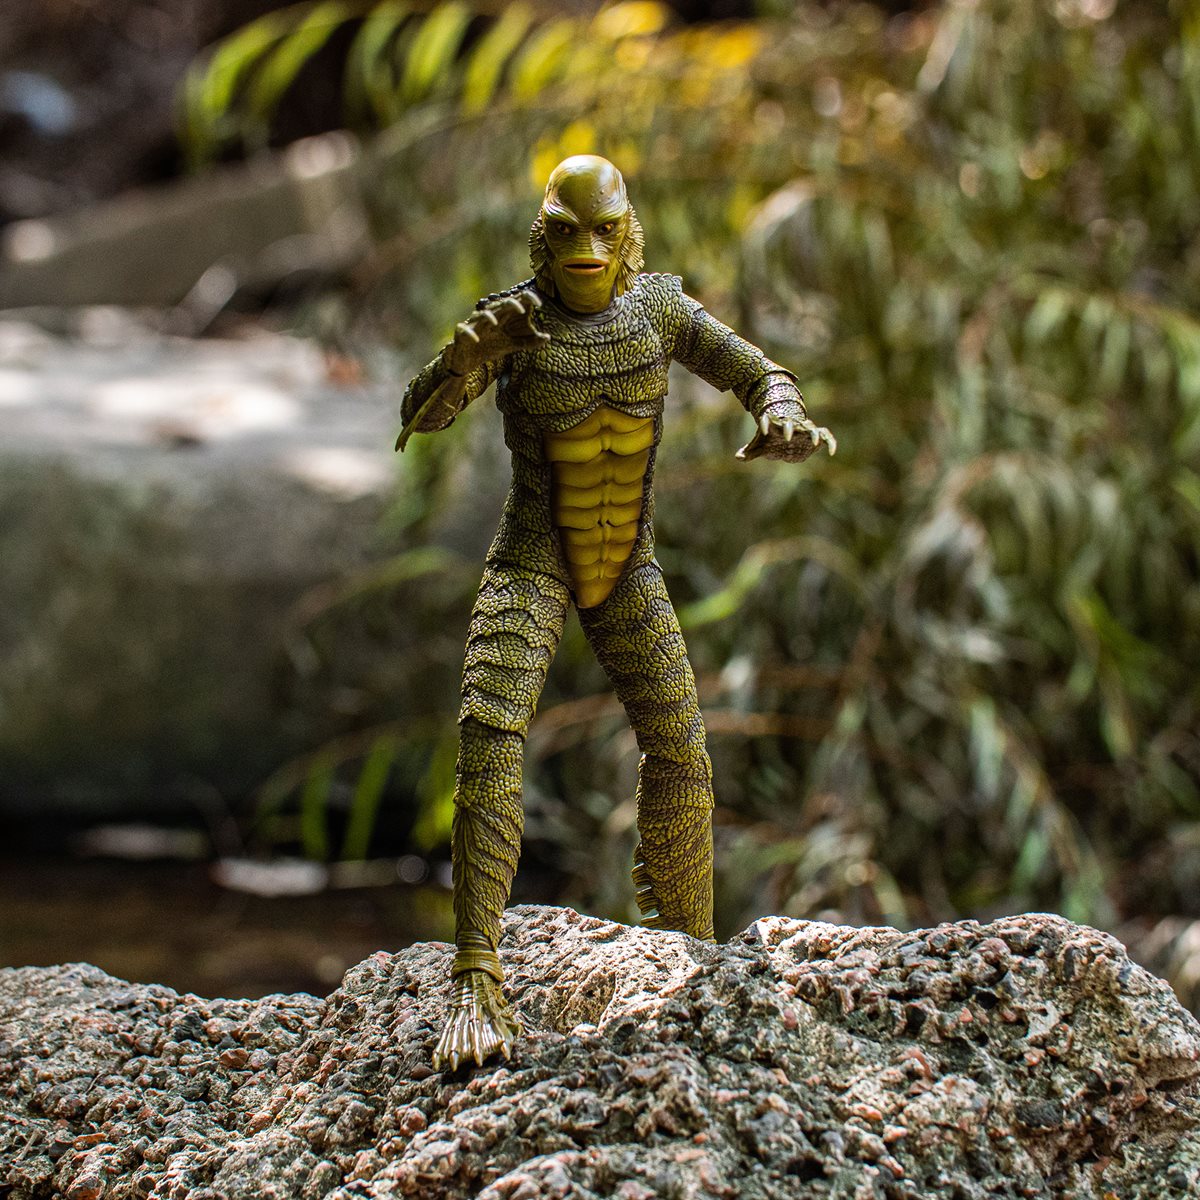 CREATURE FROM THE BLACK LAGOON 1/6 SCALE FIGURE 